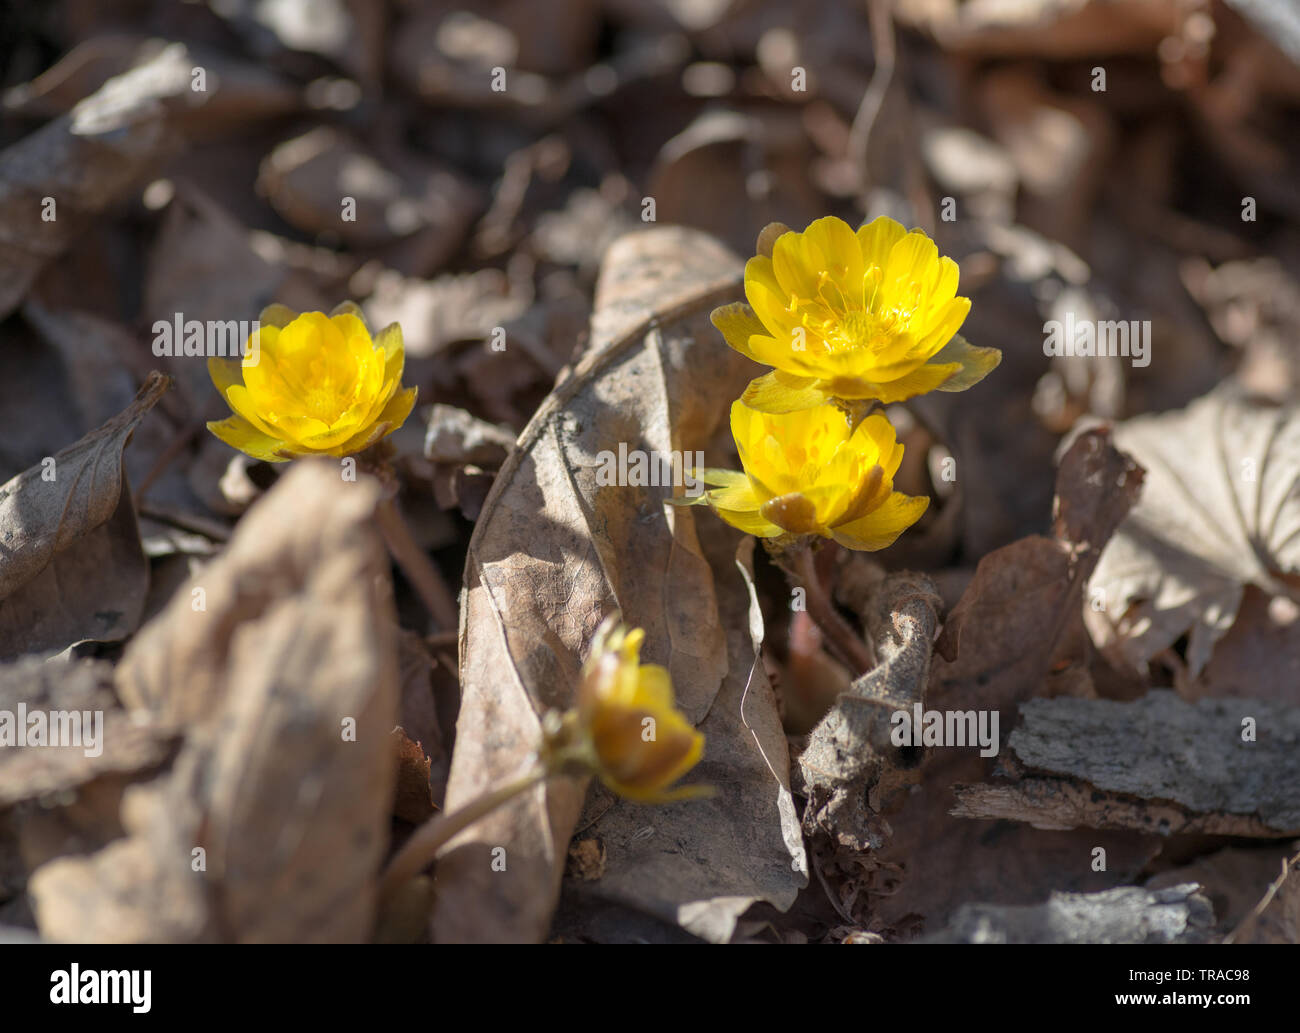 Close up view of the first spring flowers among withered leaves. Selective focus with shallow depth of field. Stock Photo